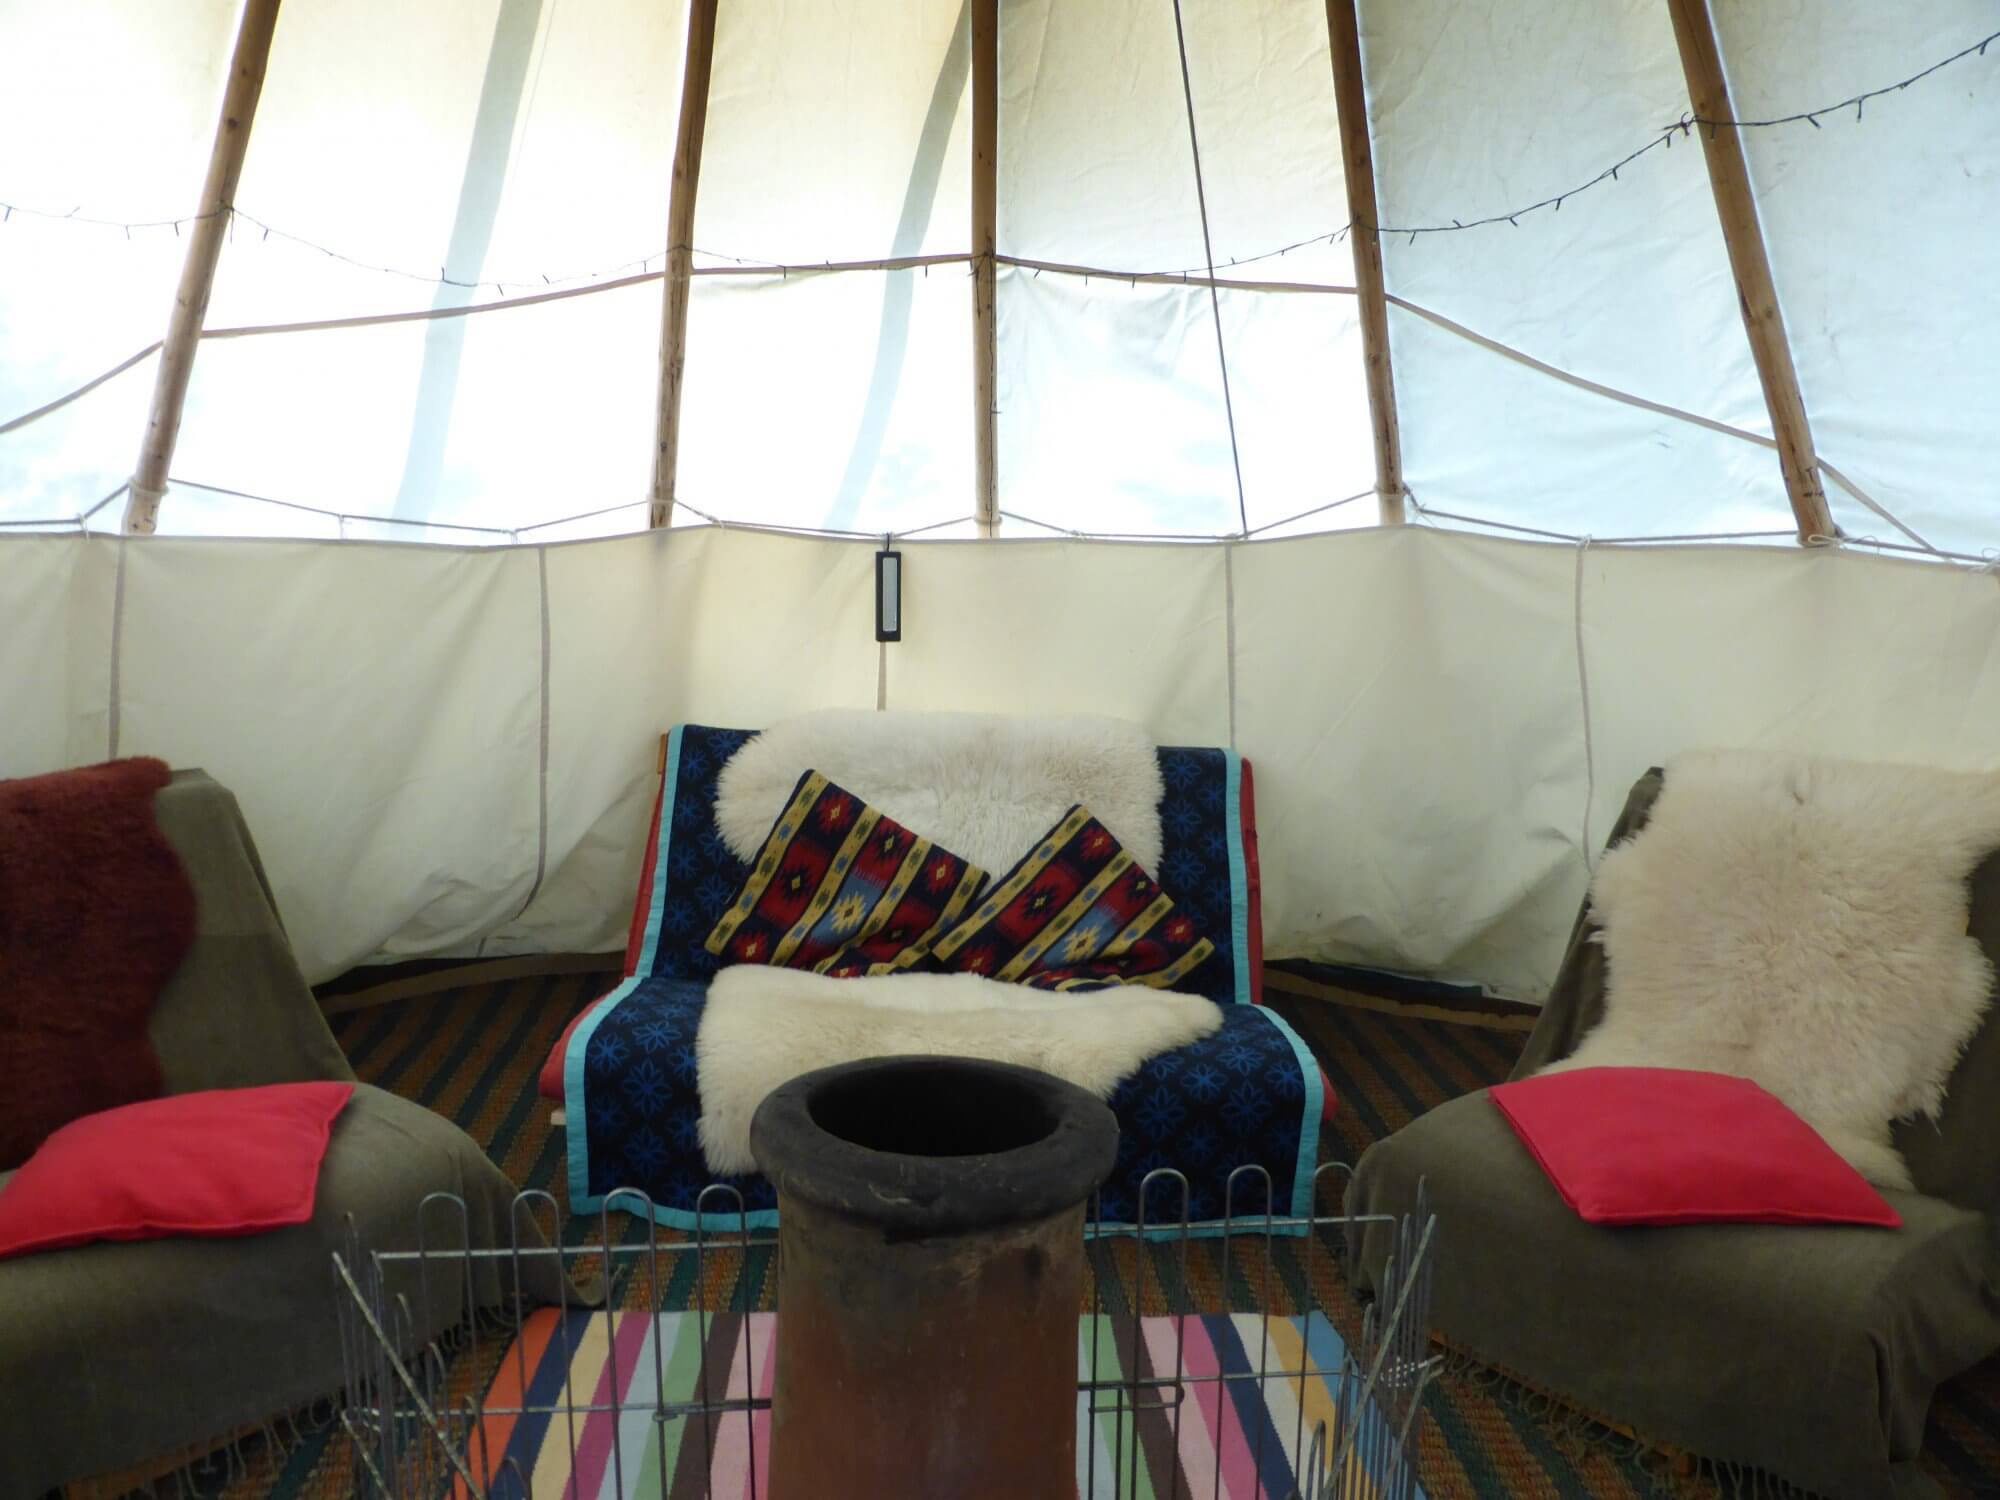 The dream of every kid: live in a wigwam for a few days!